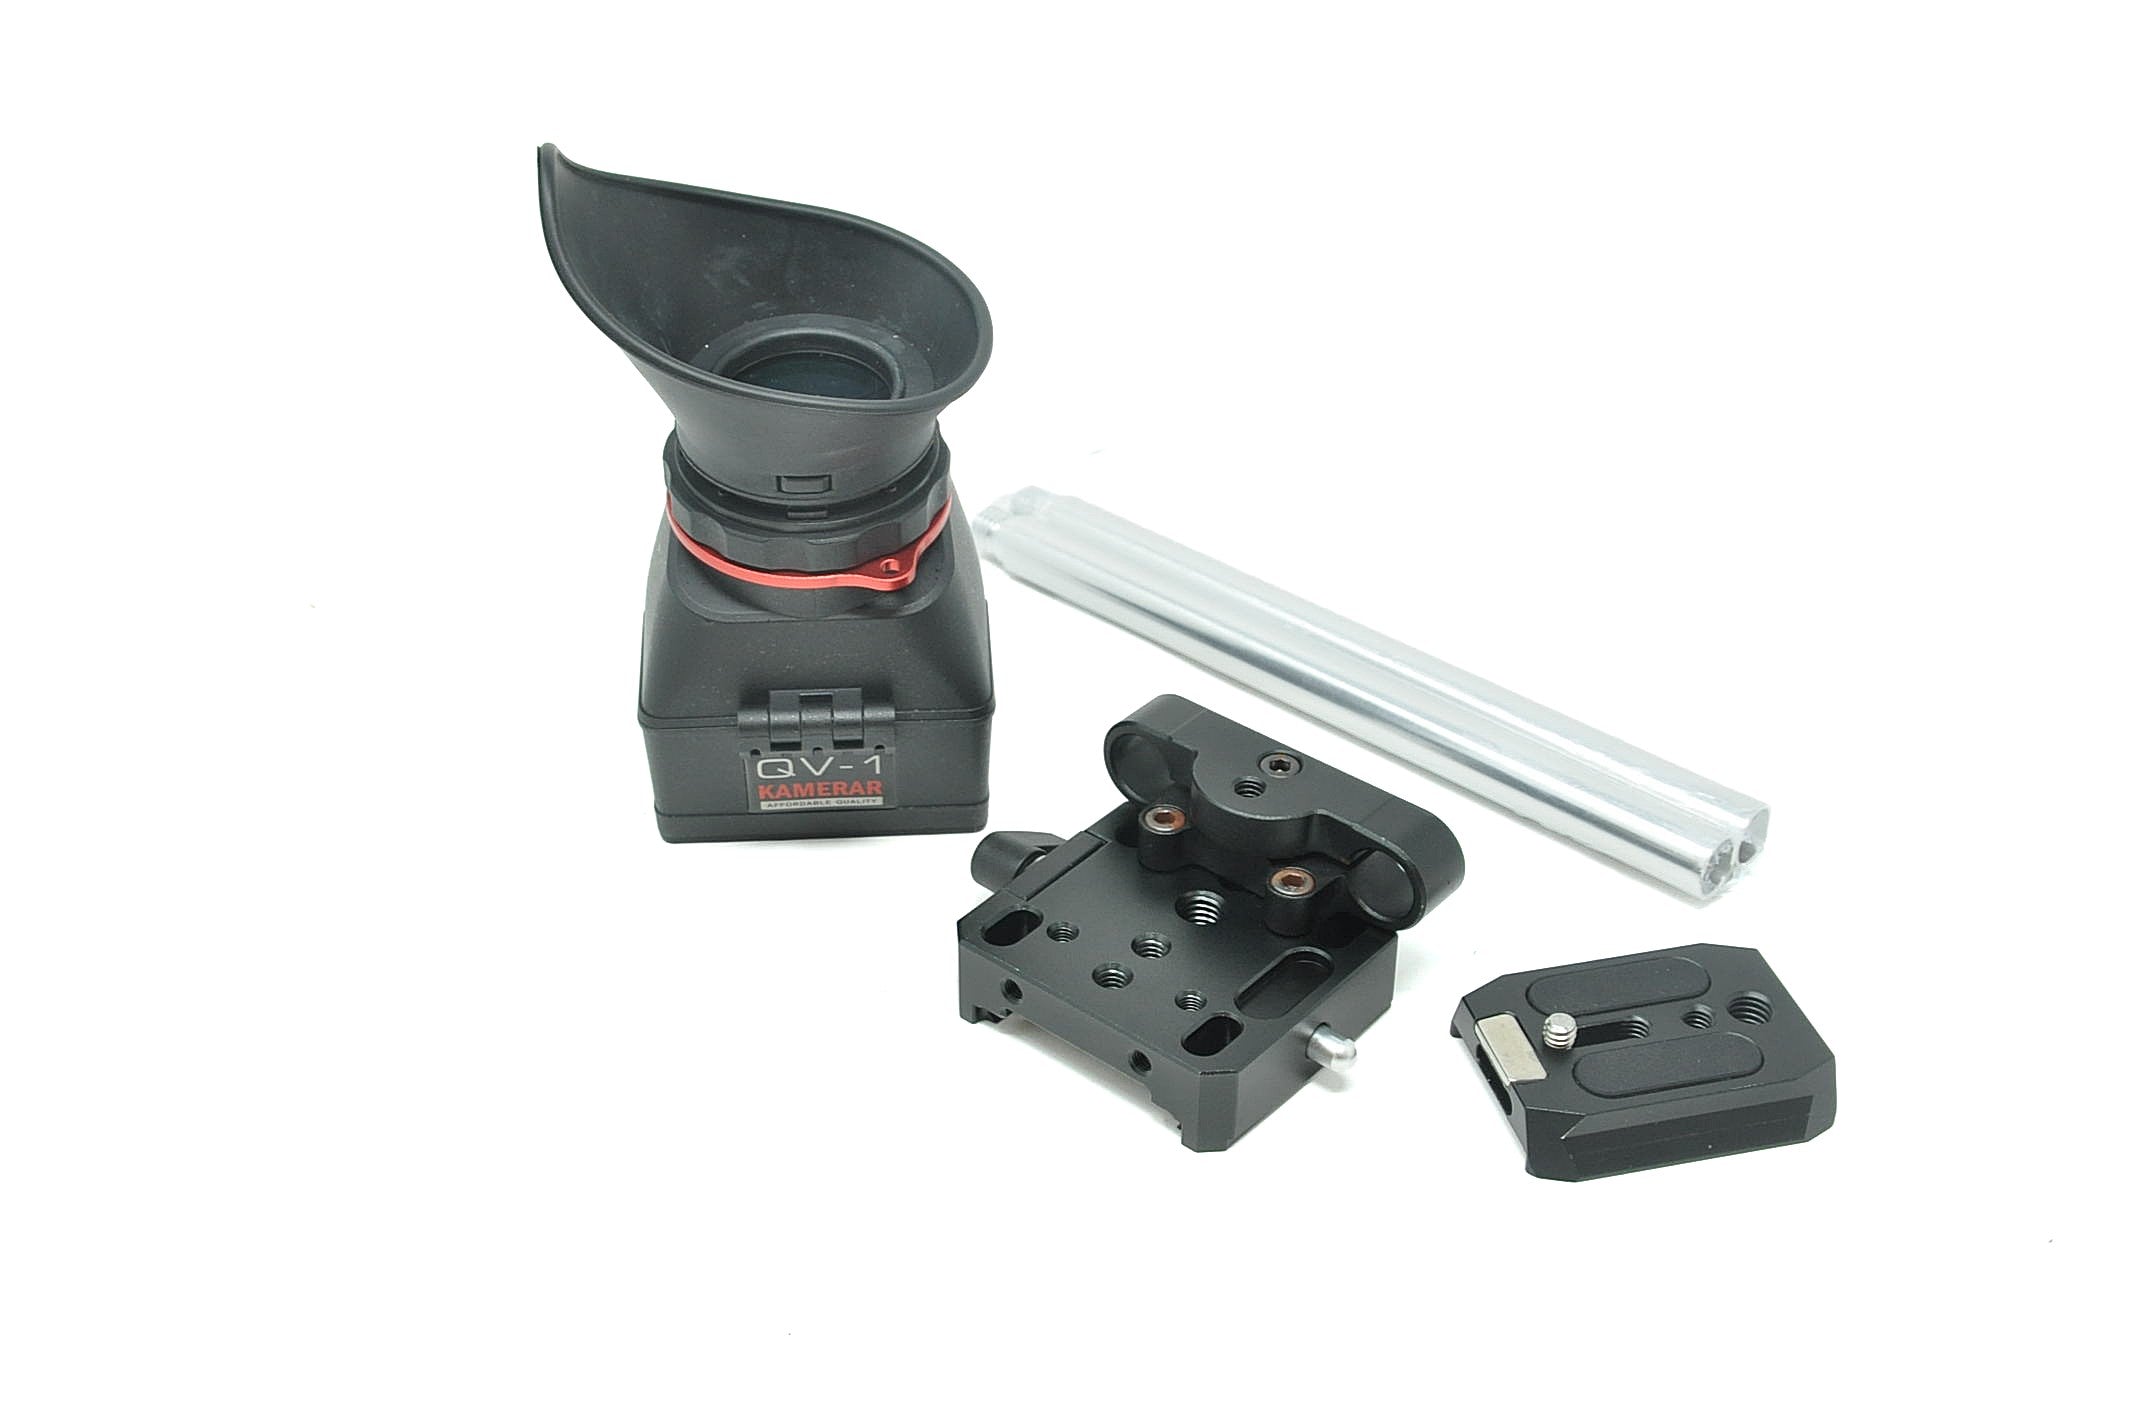 Used Kamerar QV-1 Video viewing Magnifier hood and rails (SH40029)